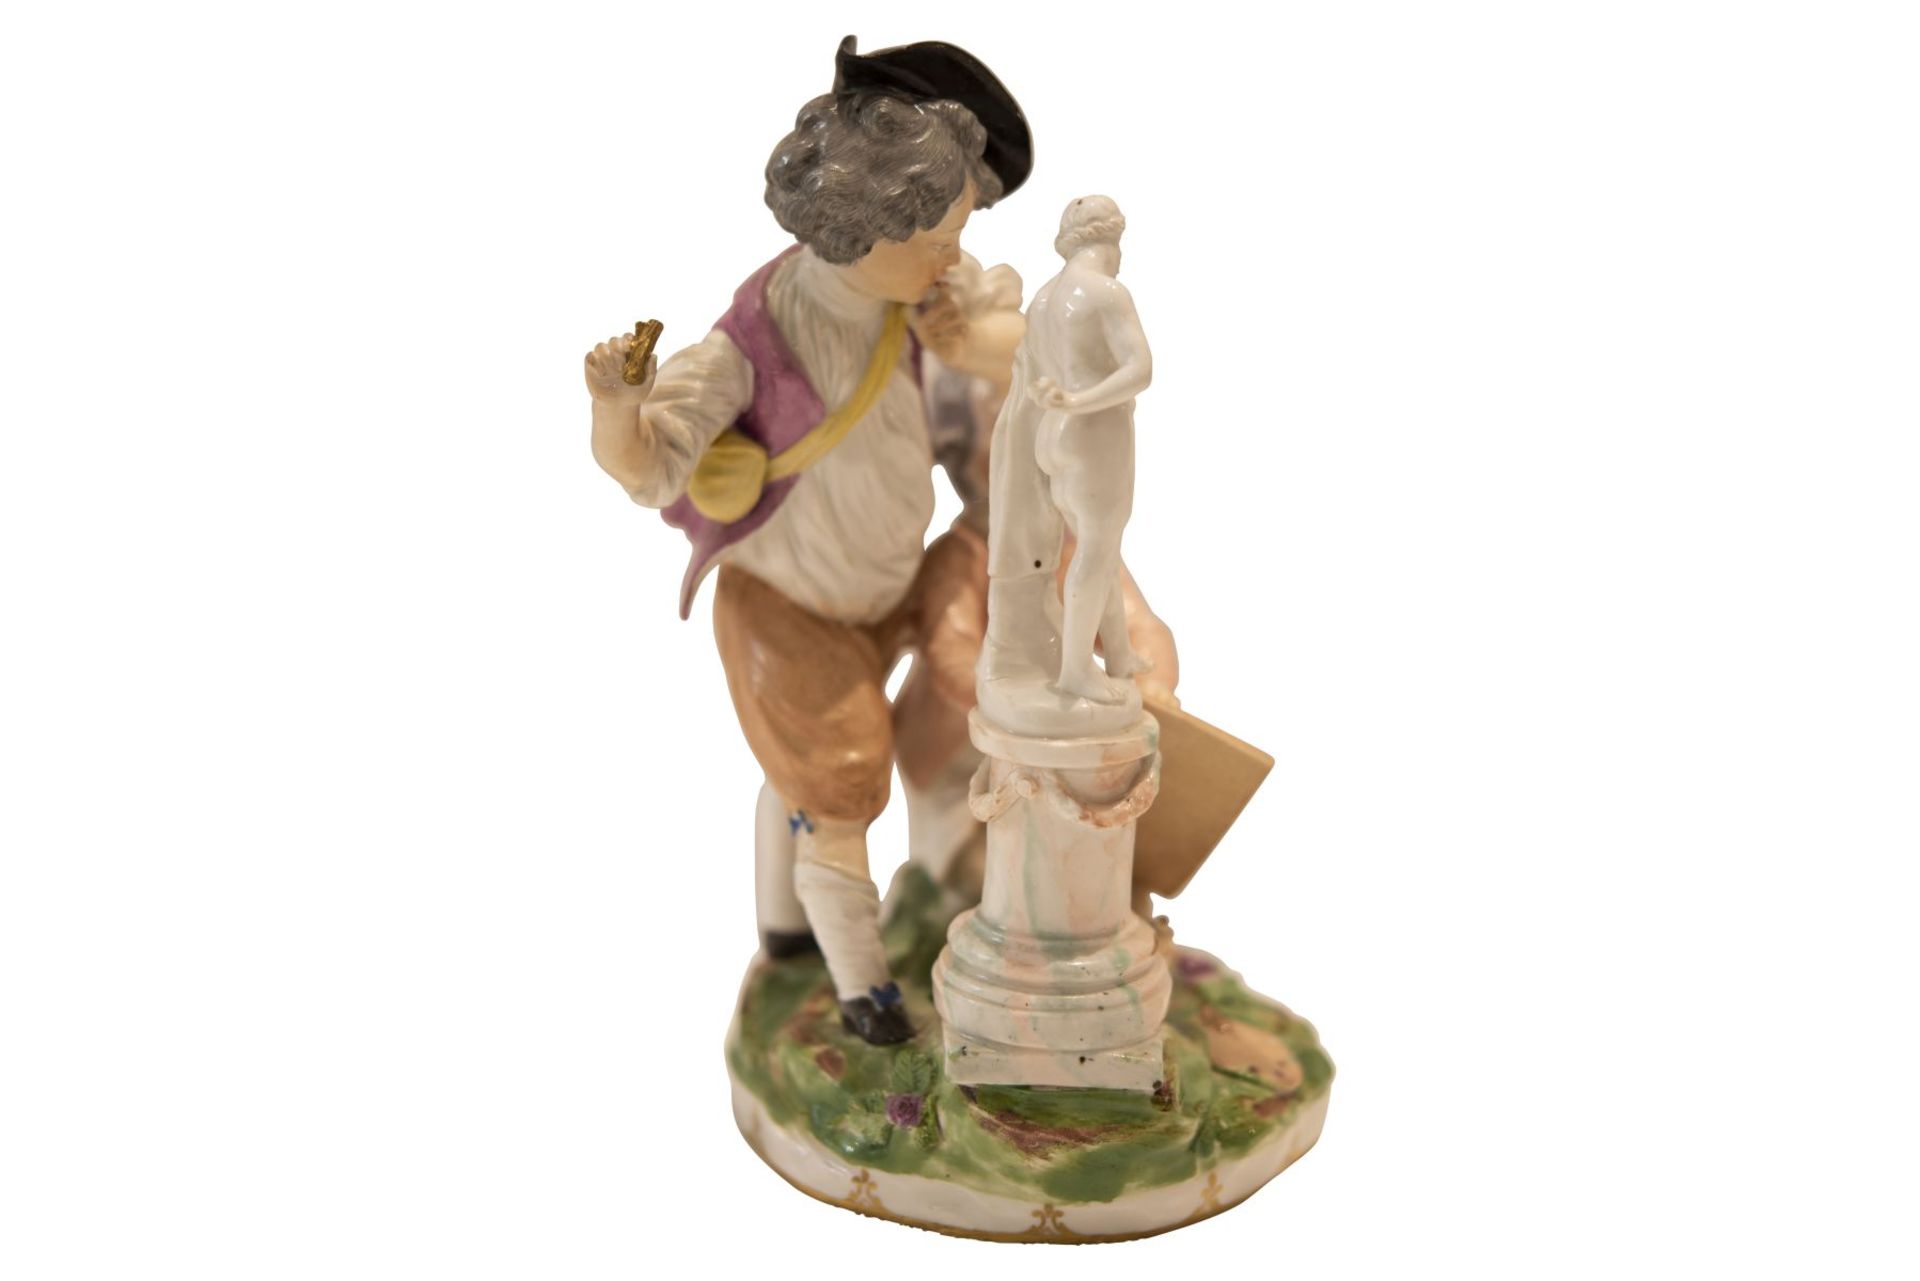 Figures group "Painters" Viennese Porcelain Manufacture 18th century - Image 2 of 6